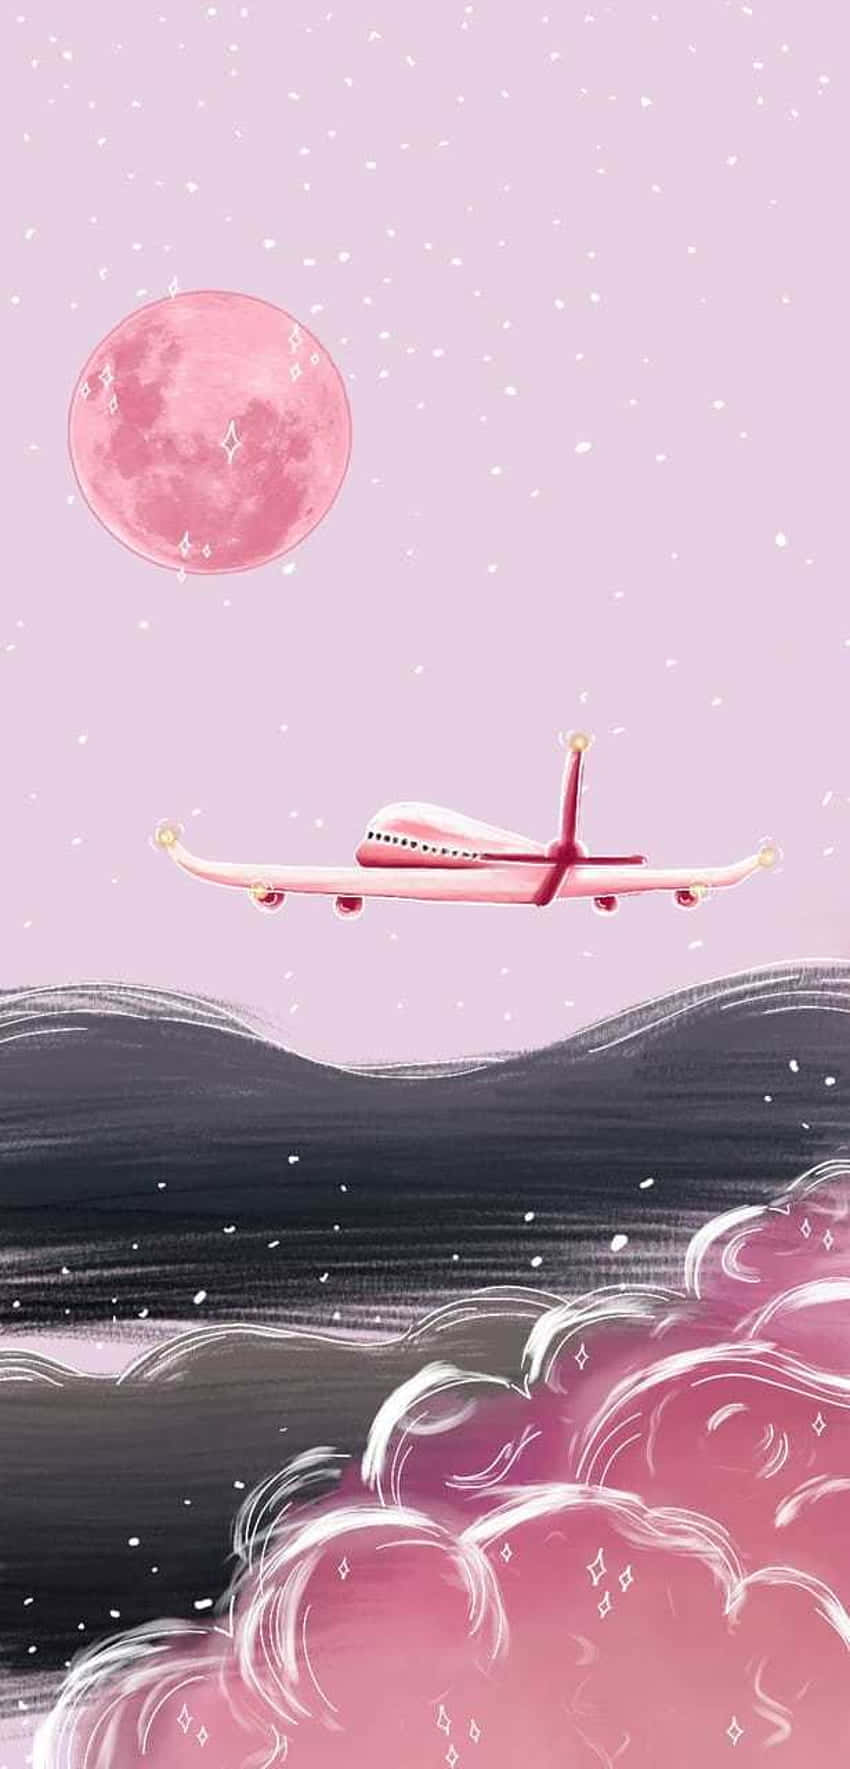 Soar High Above the Clouds in this Majestic Pink Plane Wallpaper